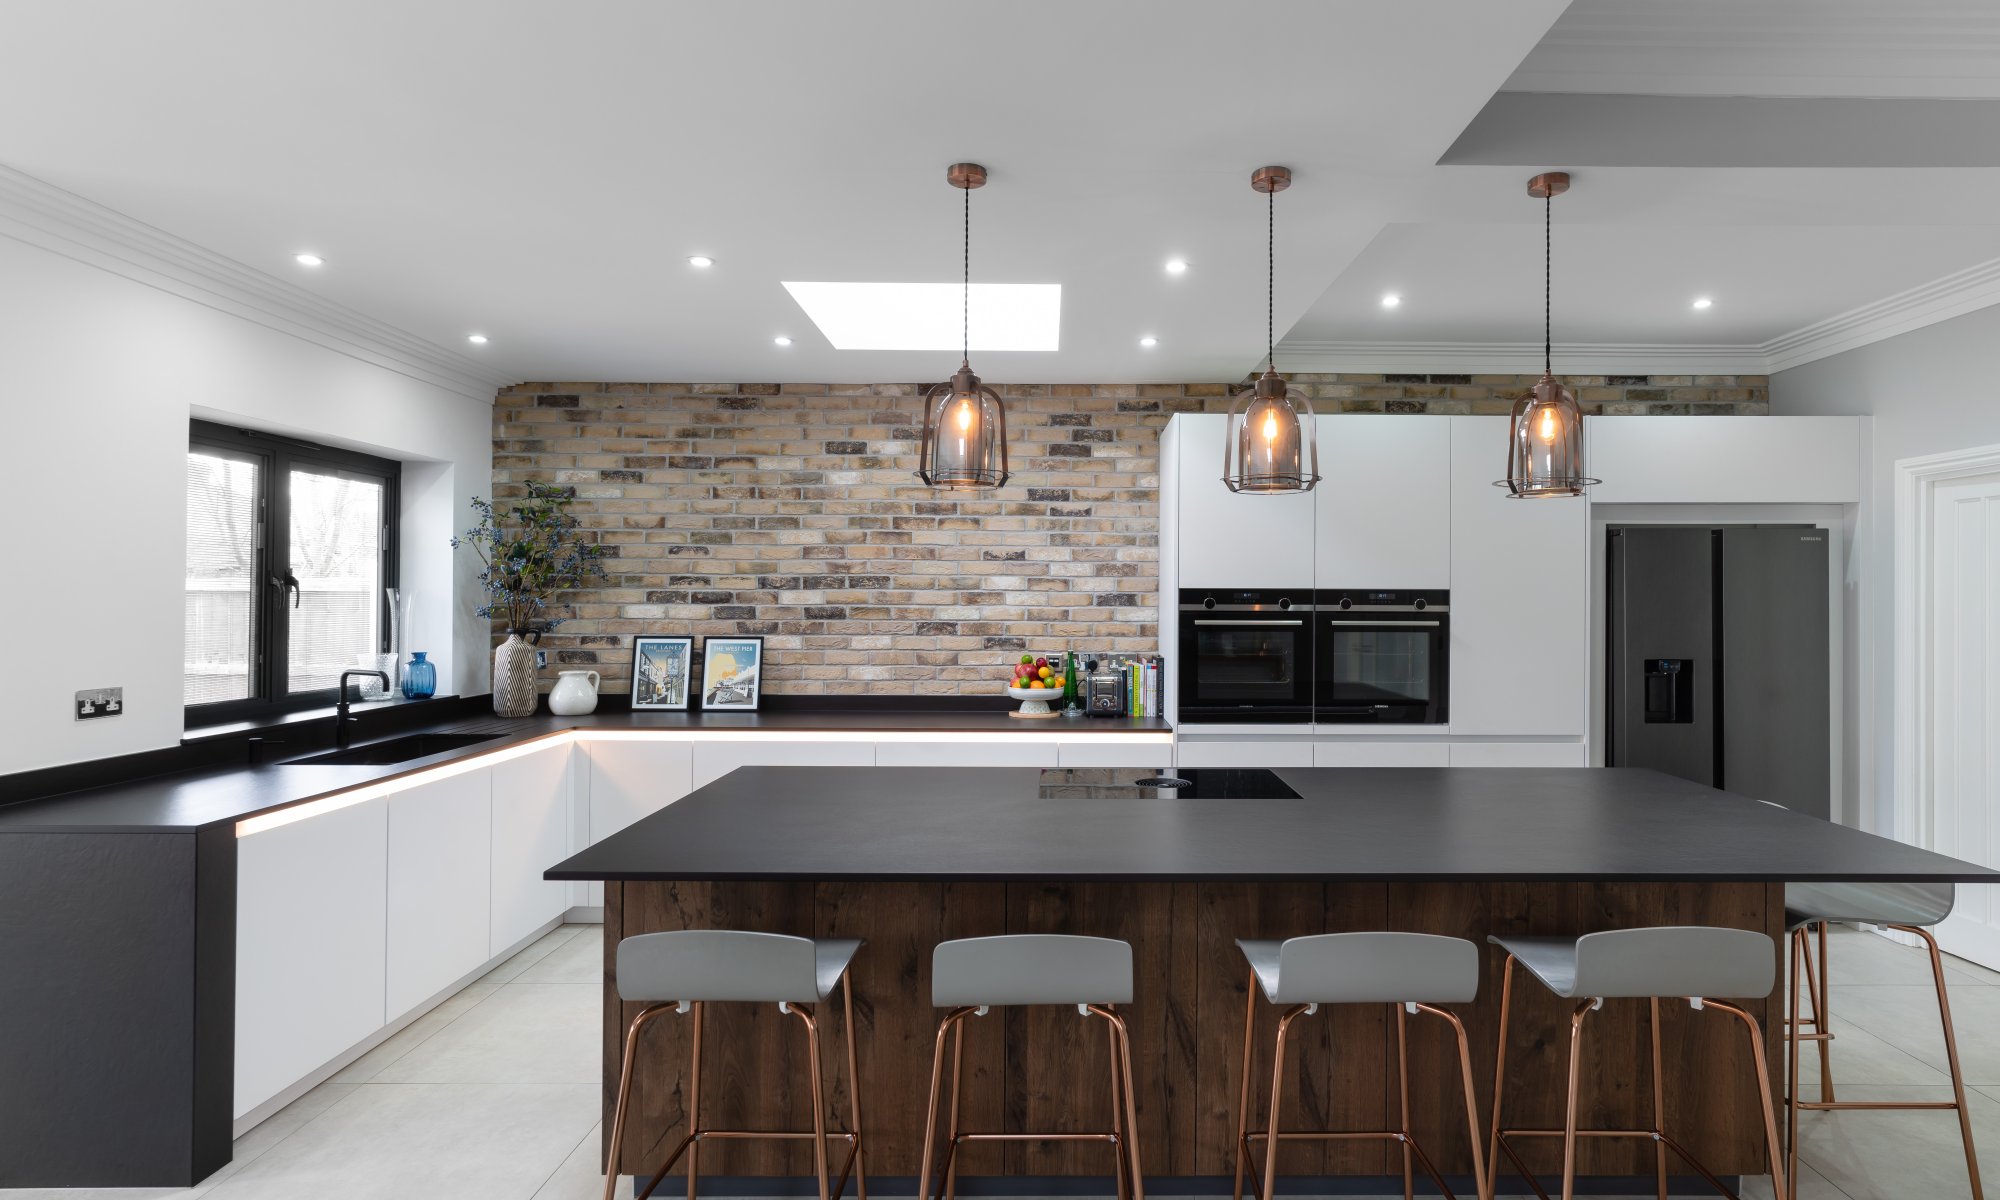 Modern kitchen with exposed brickwork and industrial details